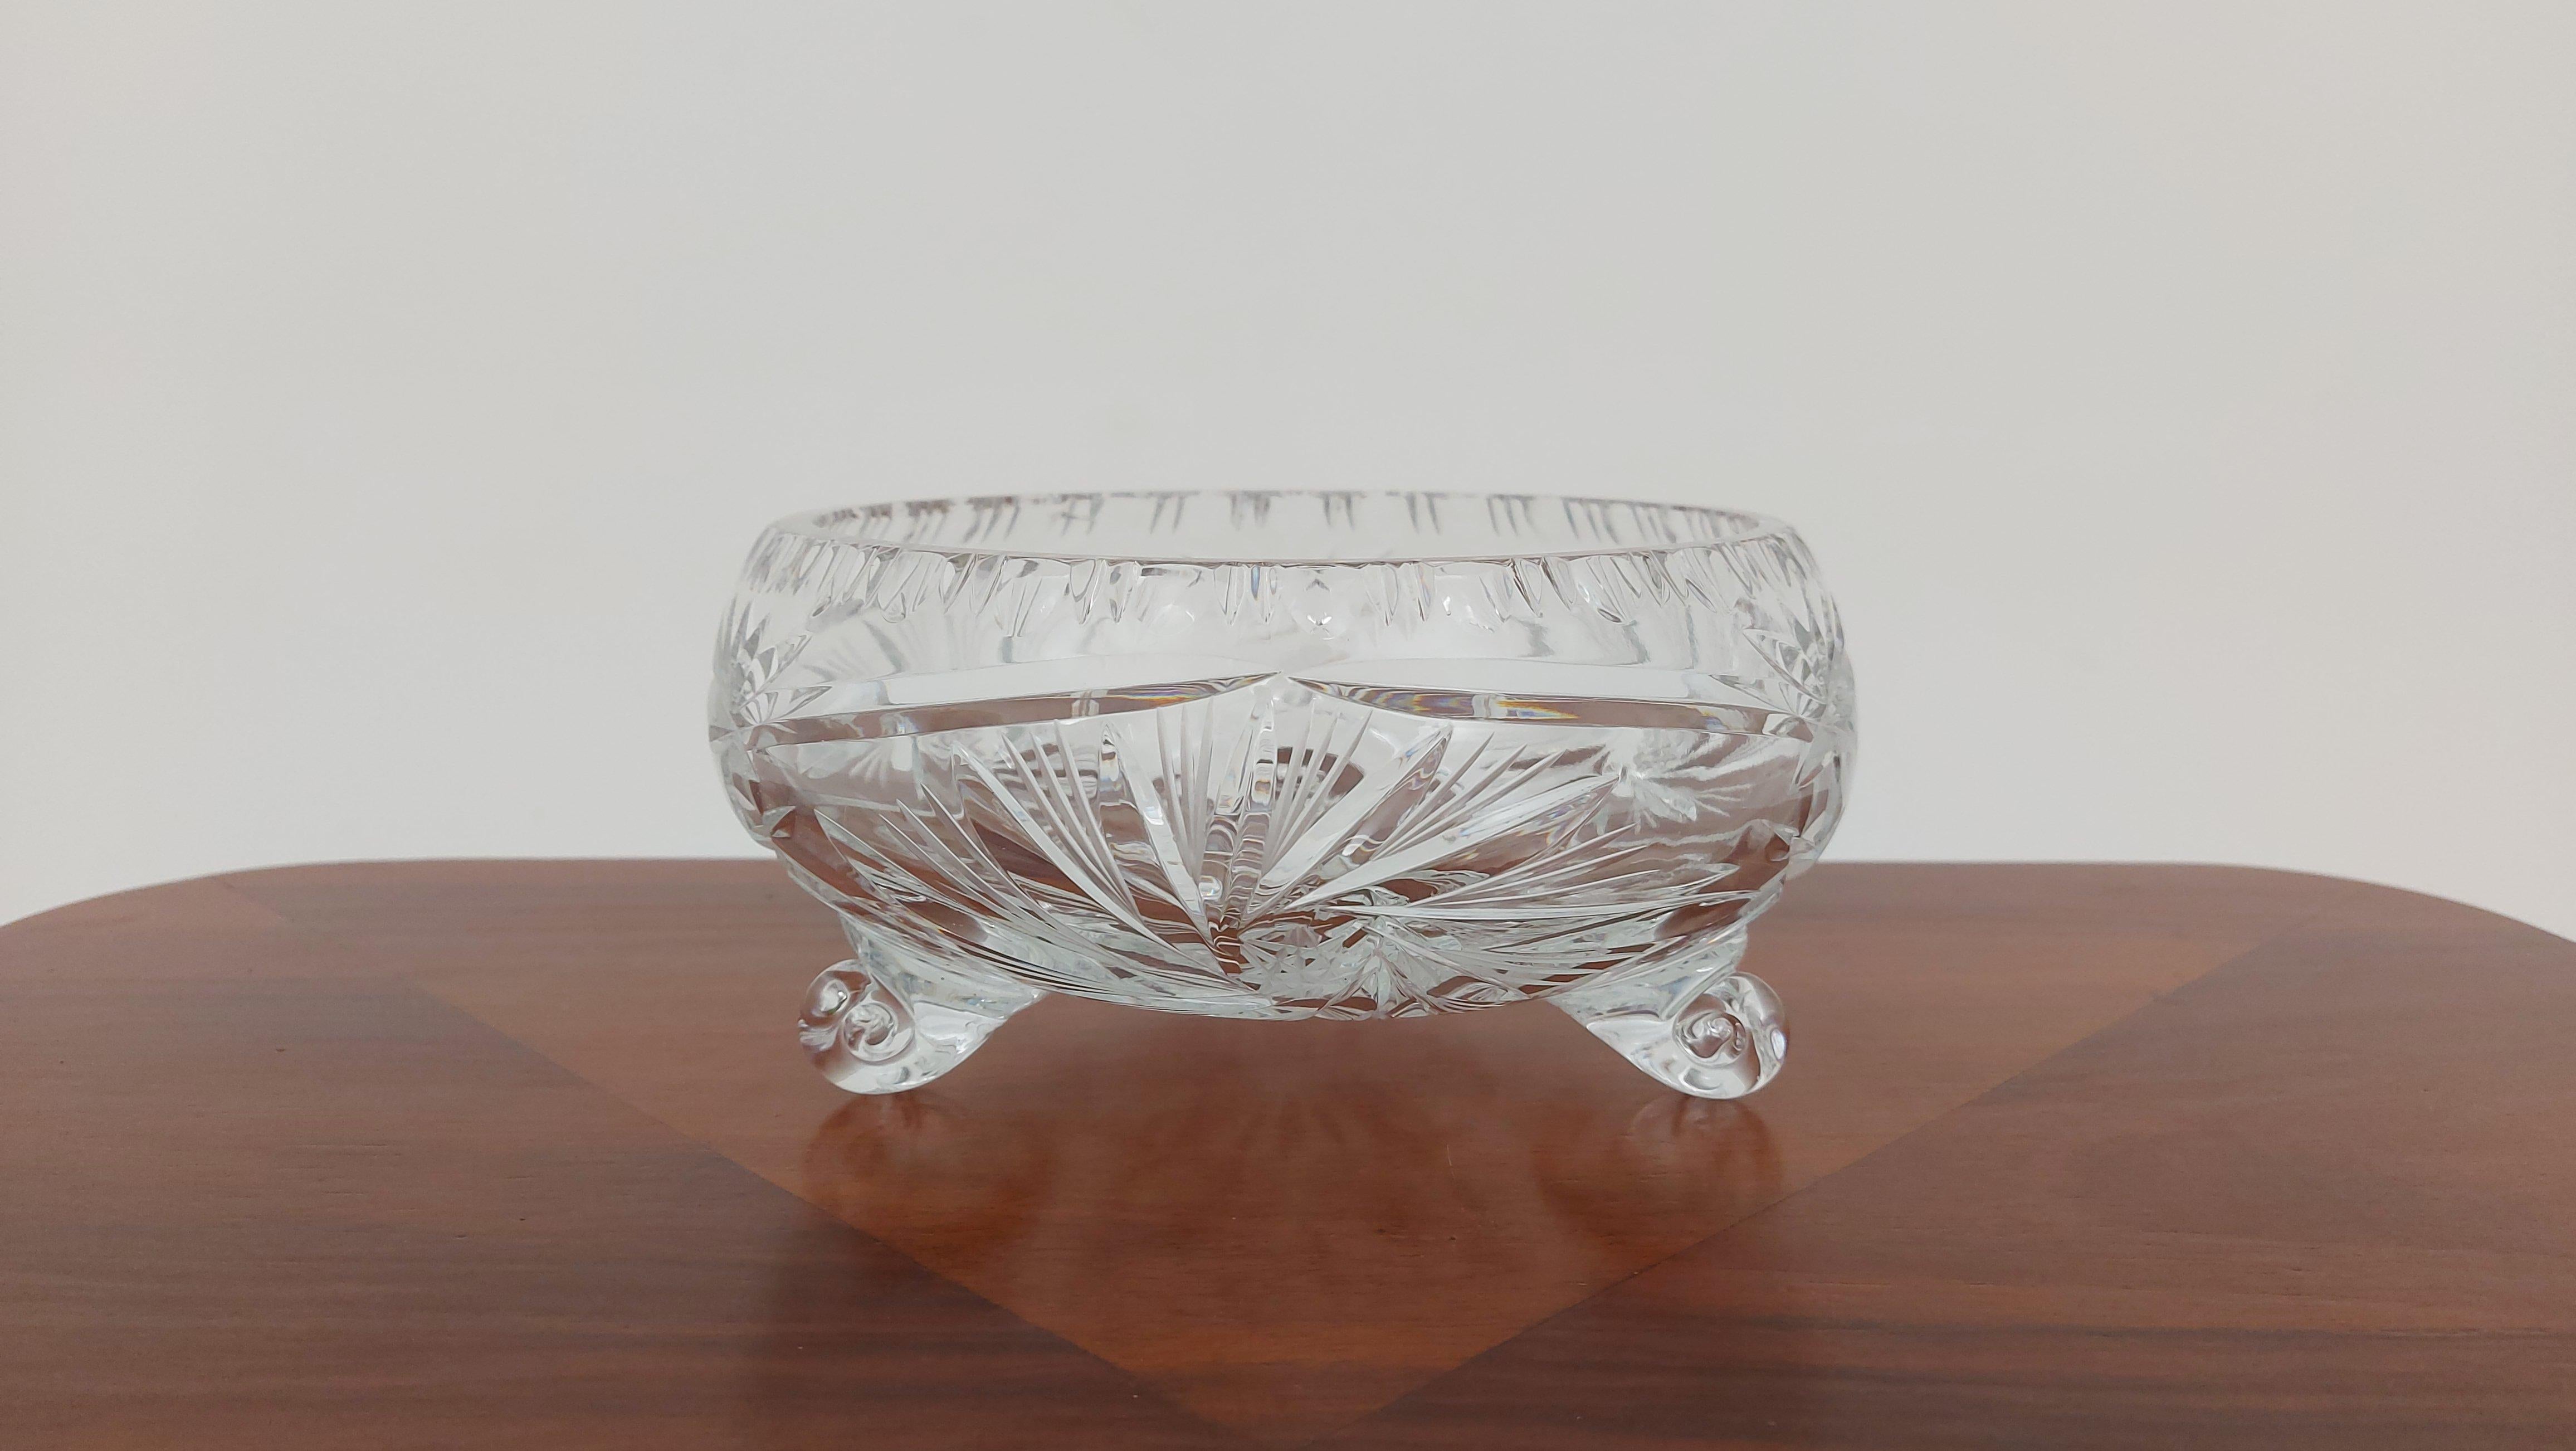 Crystal bowl for fruit or sweets.

Made in Poland in the 1950s / 1960s.

Very good condition.

Dimensions: height 9.5 cm / diameter 20 cm.